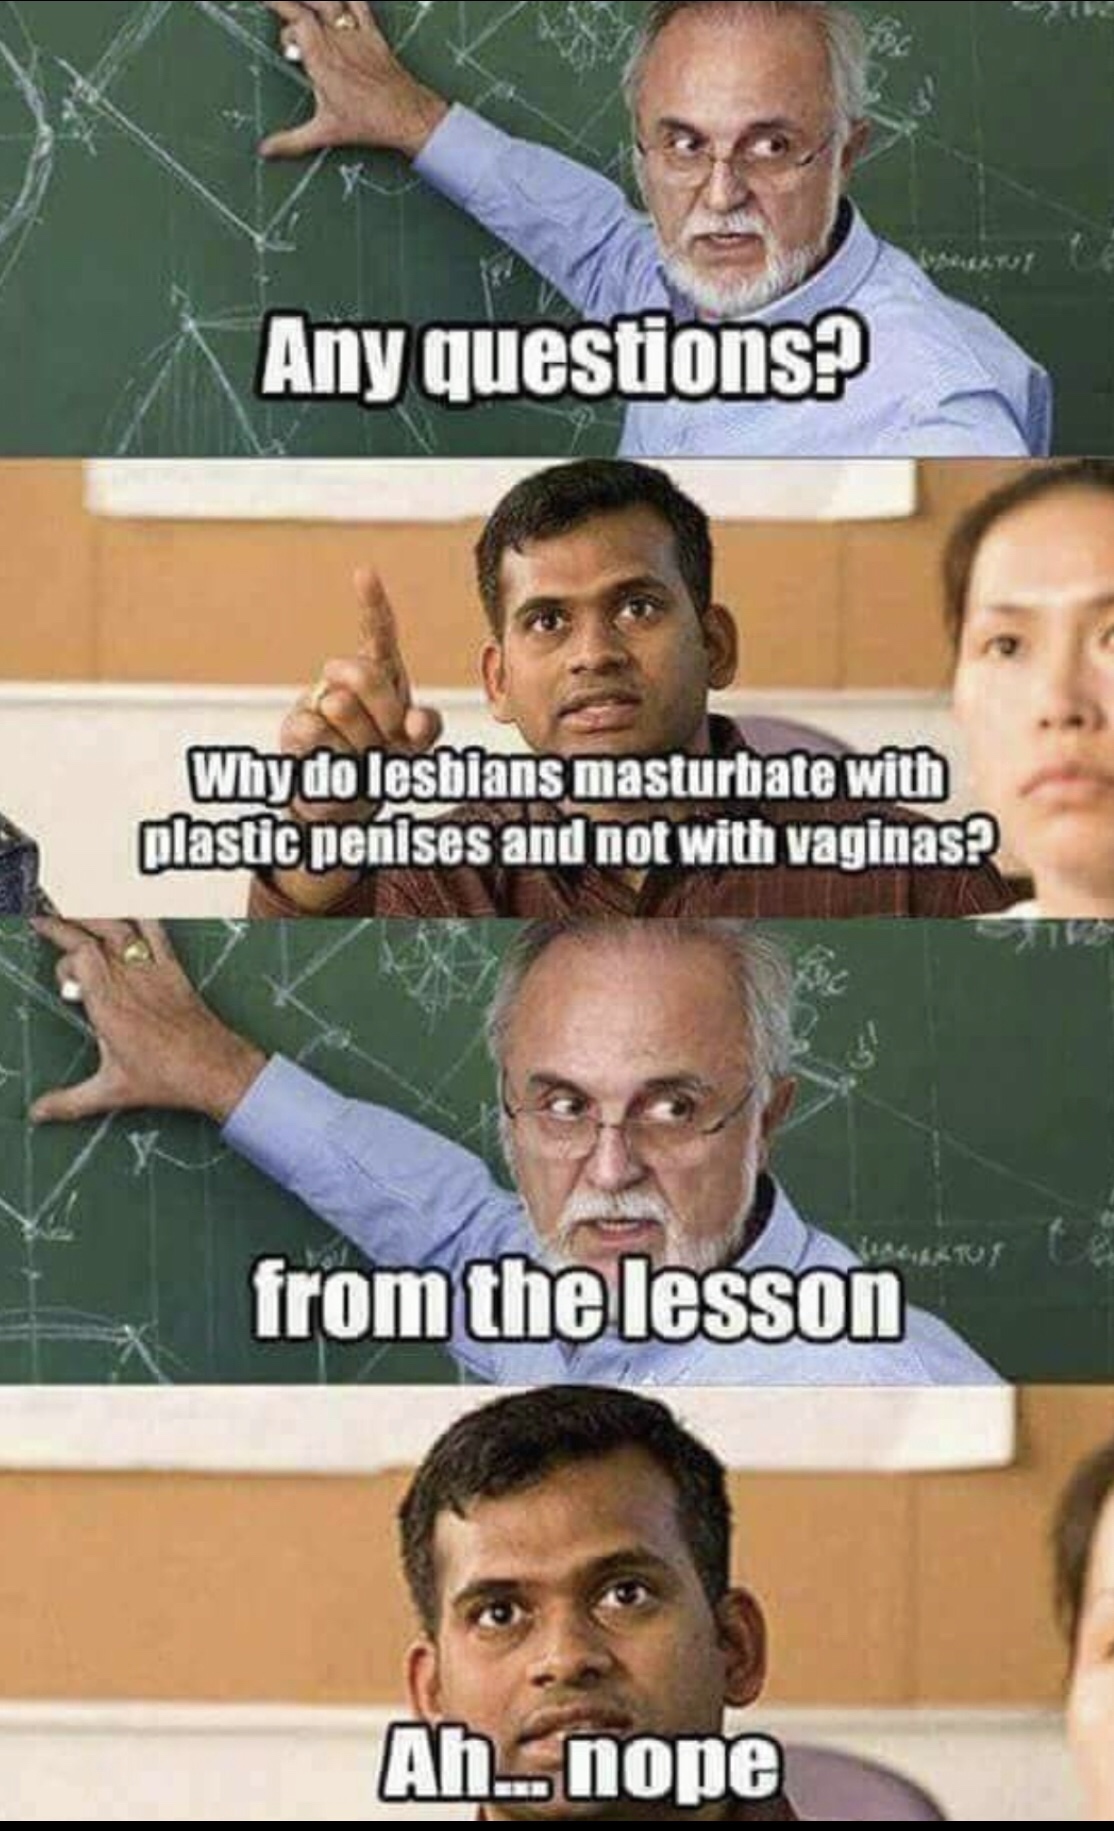 any questions funny - Any questions? Why do lesbians masturbate with plastic penises and not with vaginas? from the lesson Ahnope